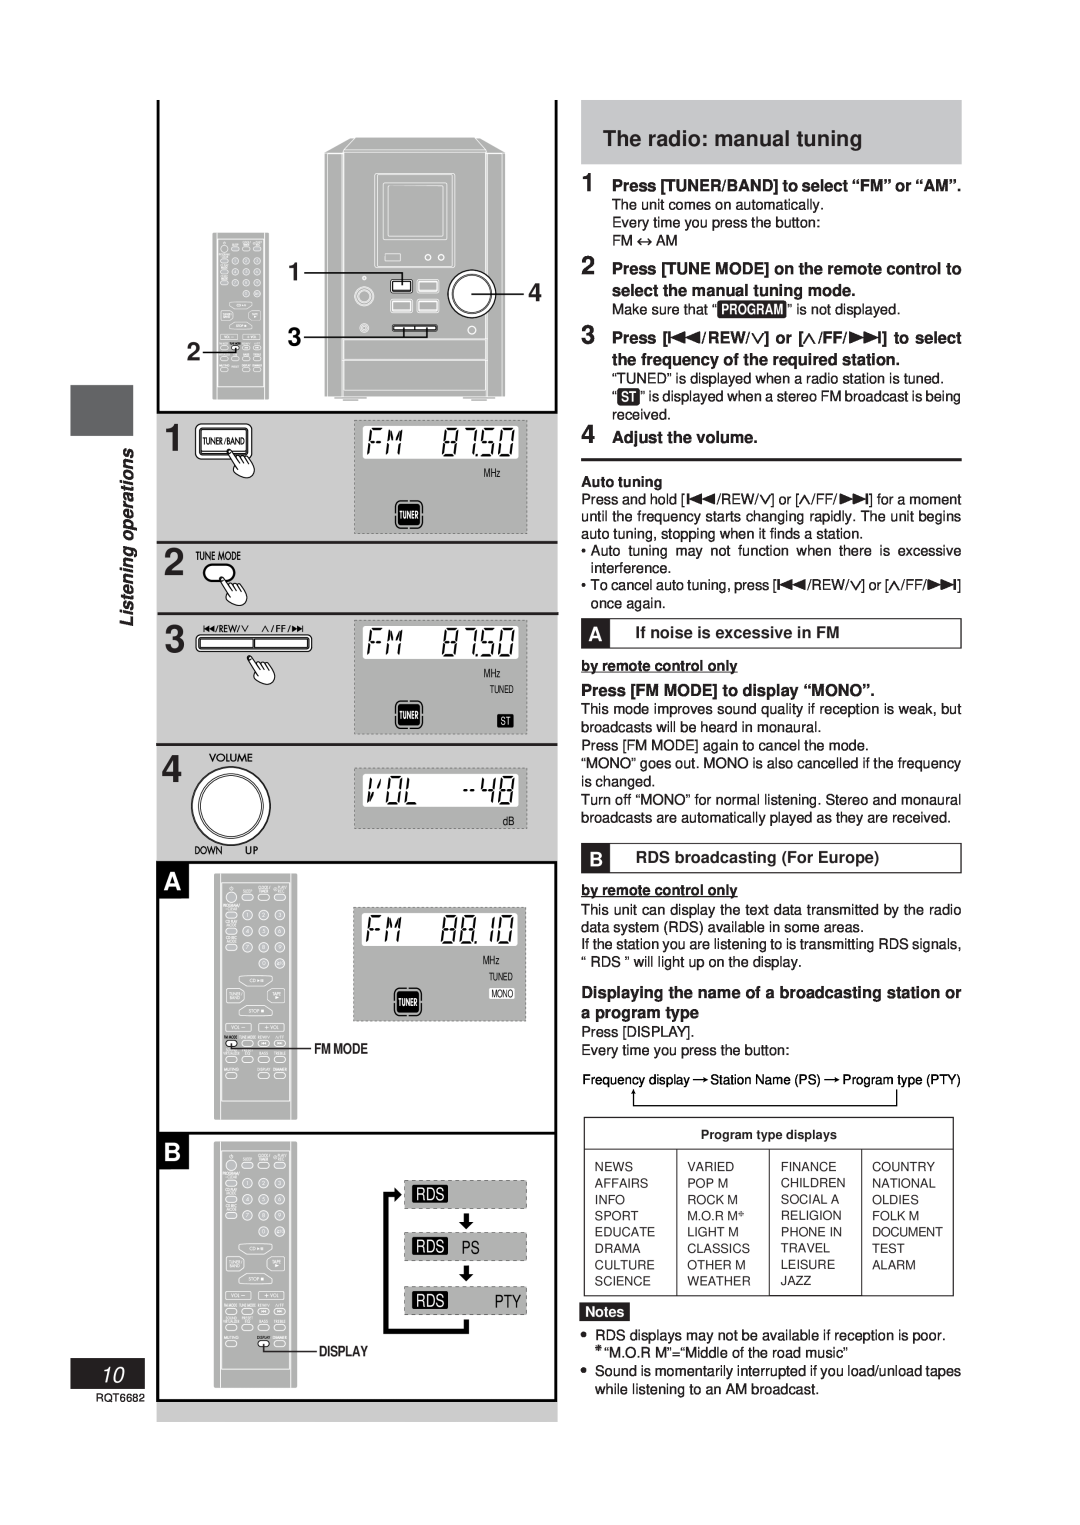 Panasonic SC-PM10 The radio manual tuning, Listening, Rds Rds Ps Rds Pty, Press TUNER/BAND to select “FM” or “AM”, Fm Mode 